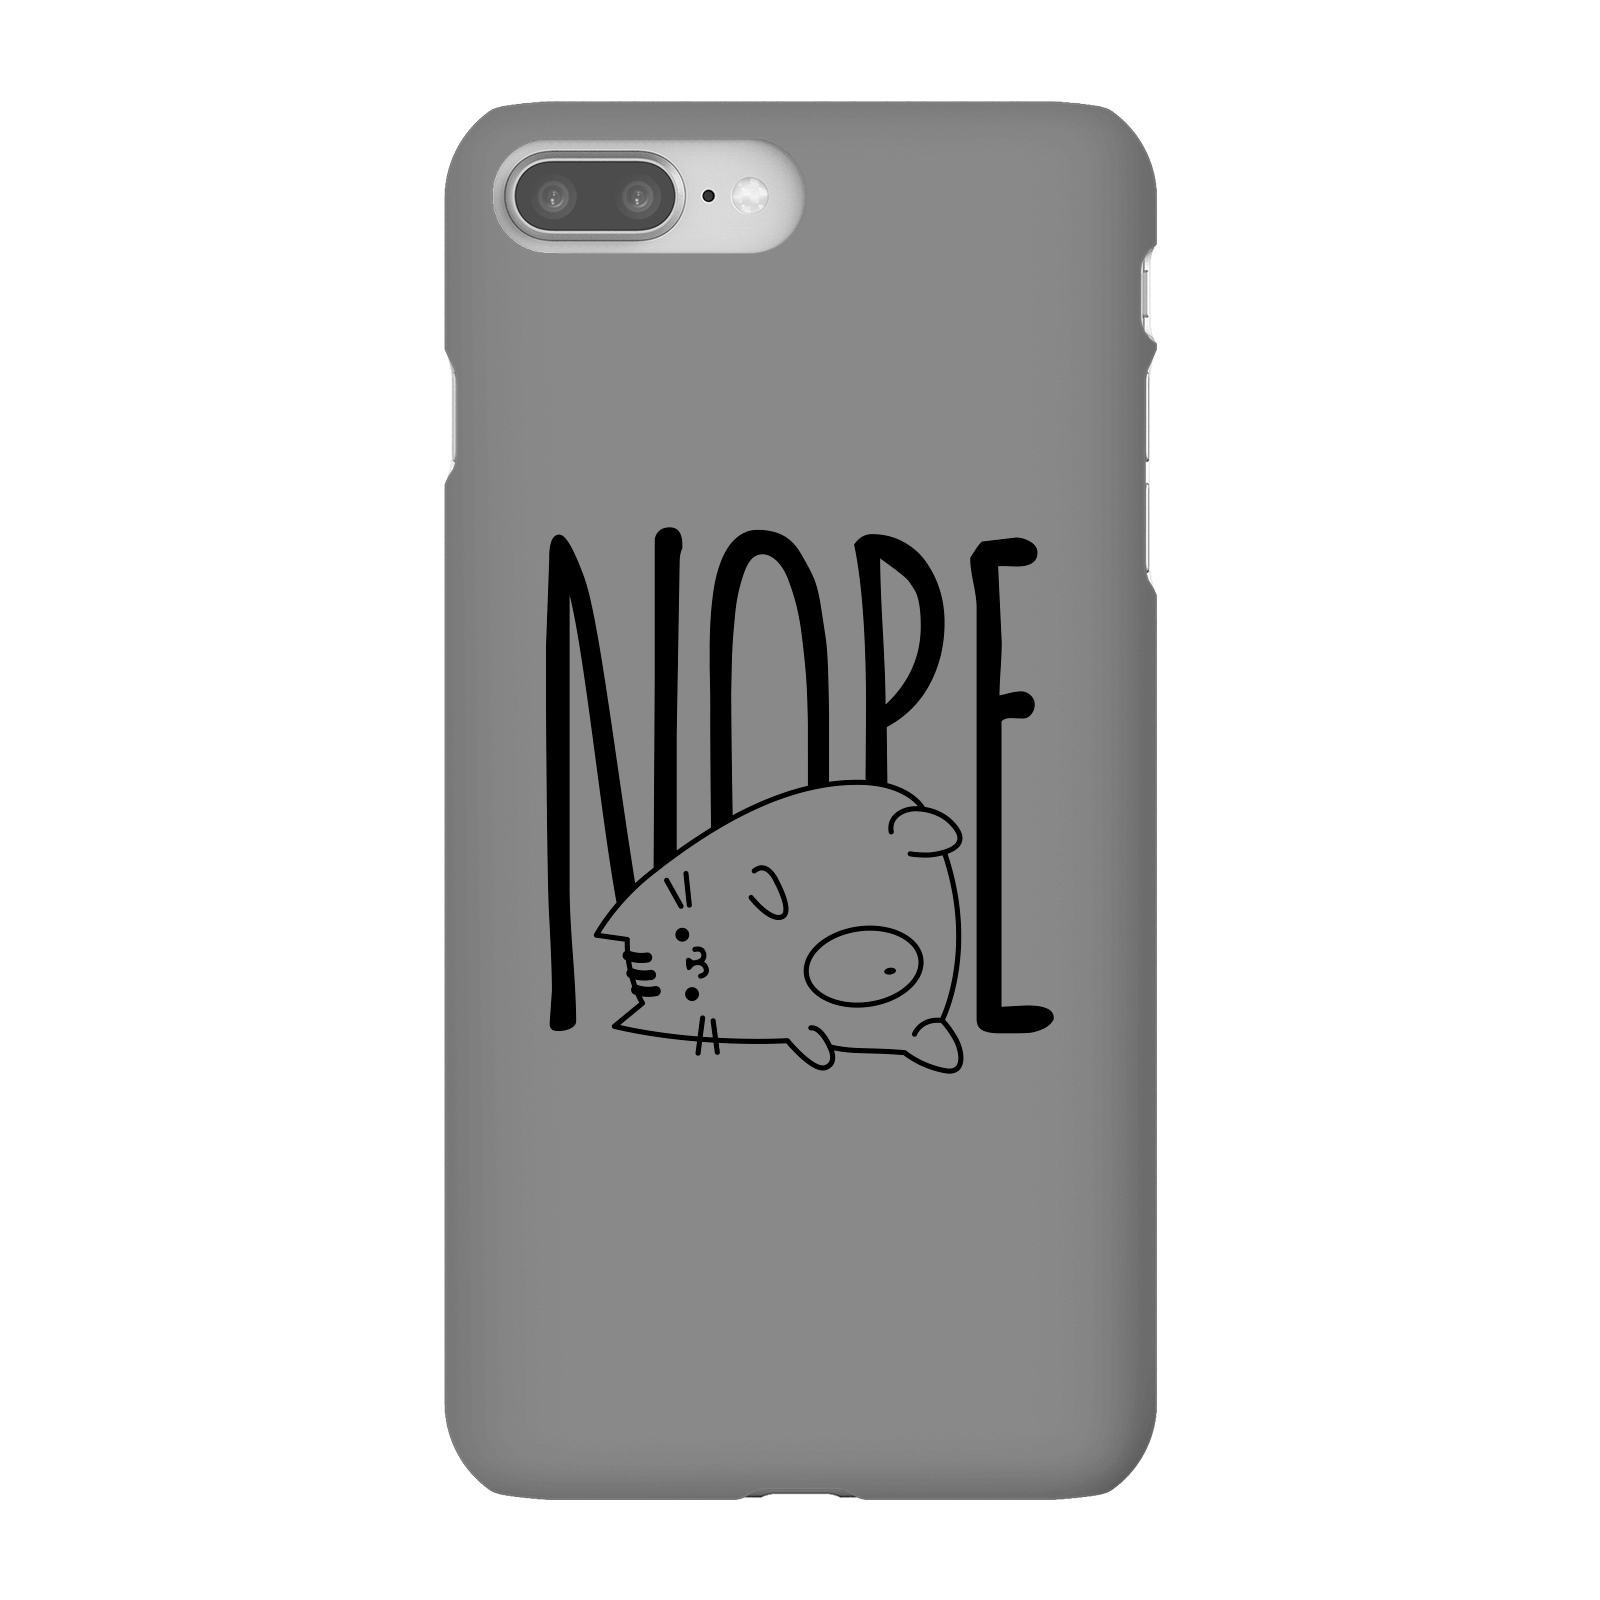 Nope Phone Case for iPhone and Android - iPhone 8 Plus - Snap Case - Matte